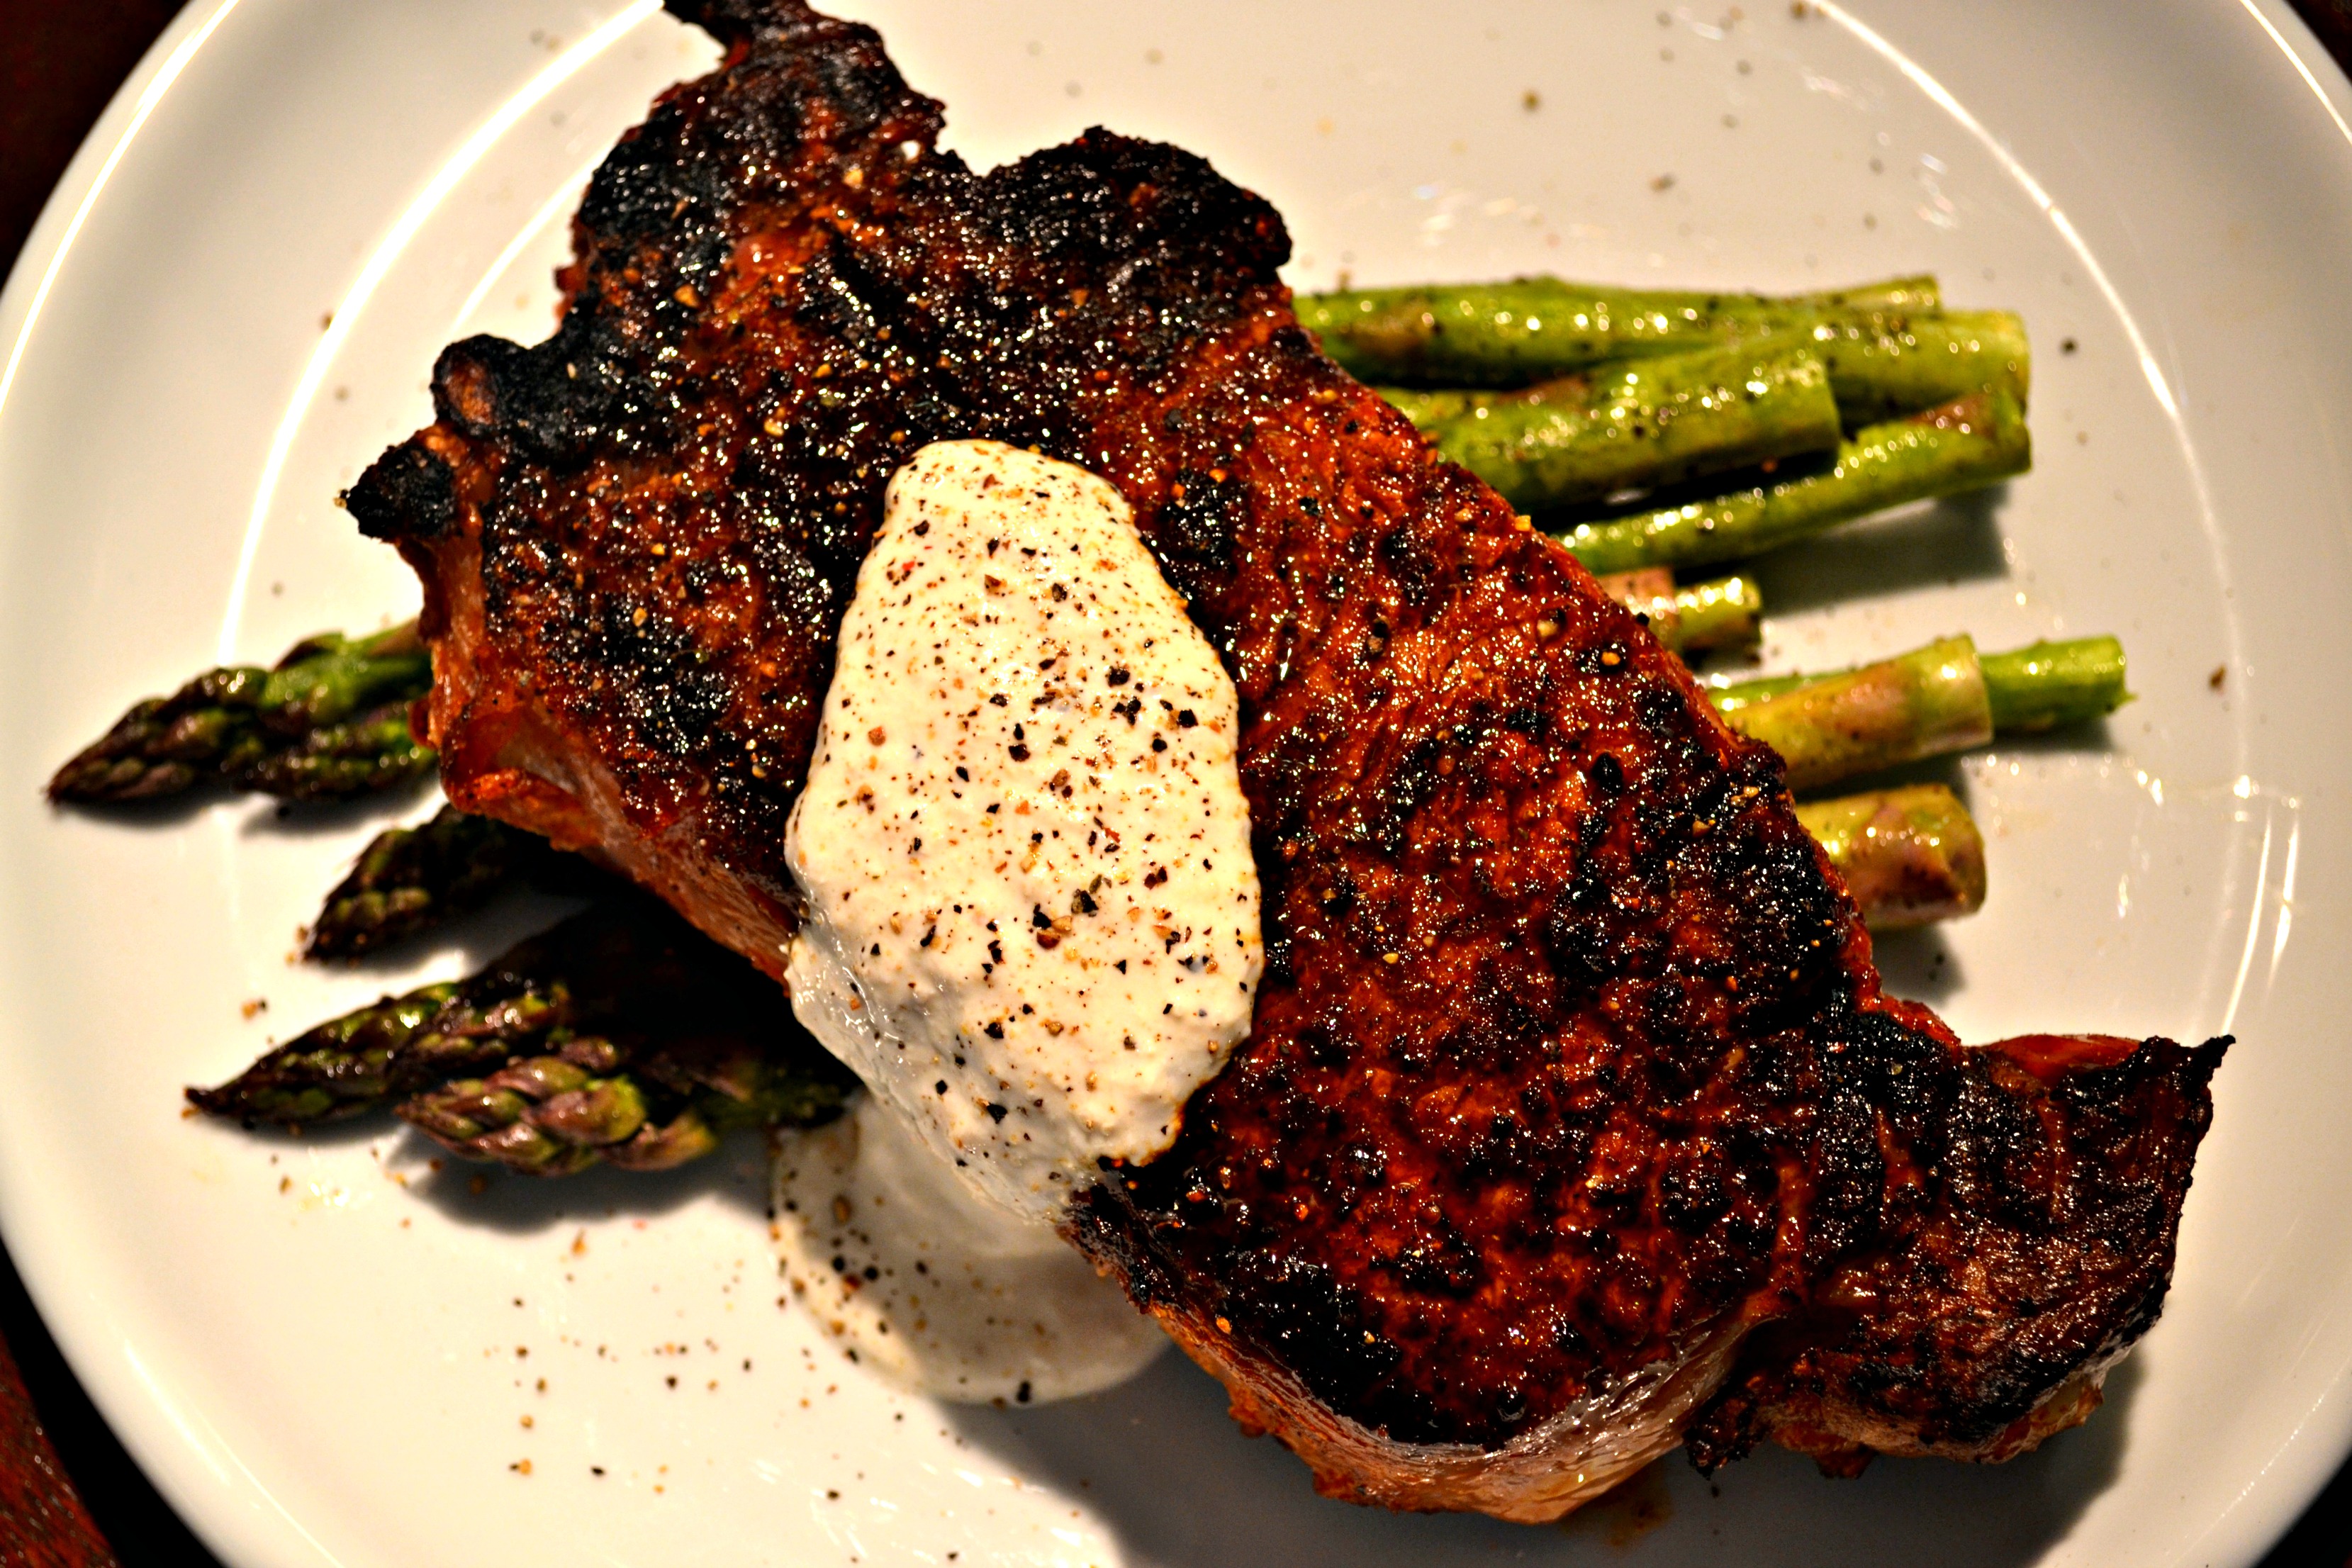 Spice-Rubbed New York Strip Steaks with a Horseradish Cream Sauce